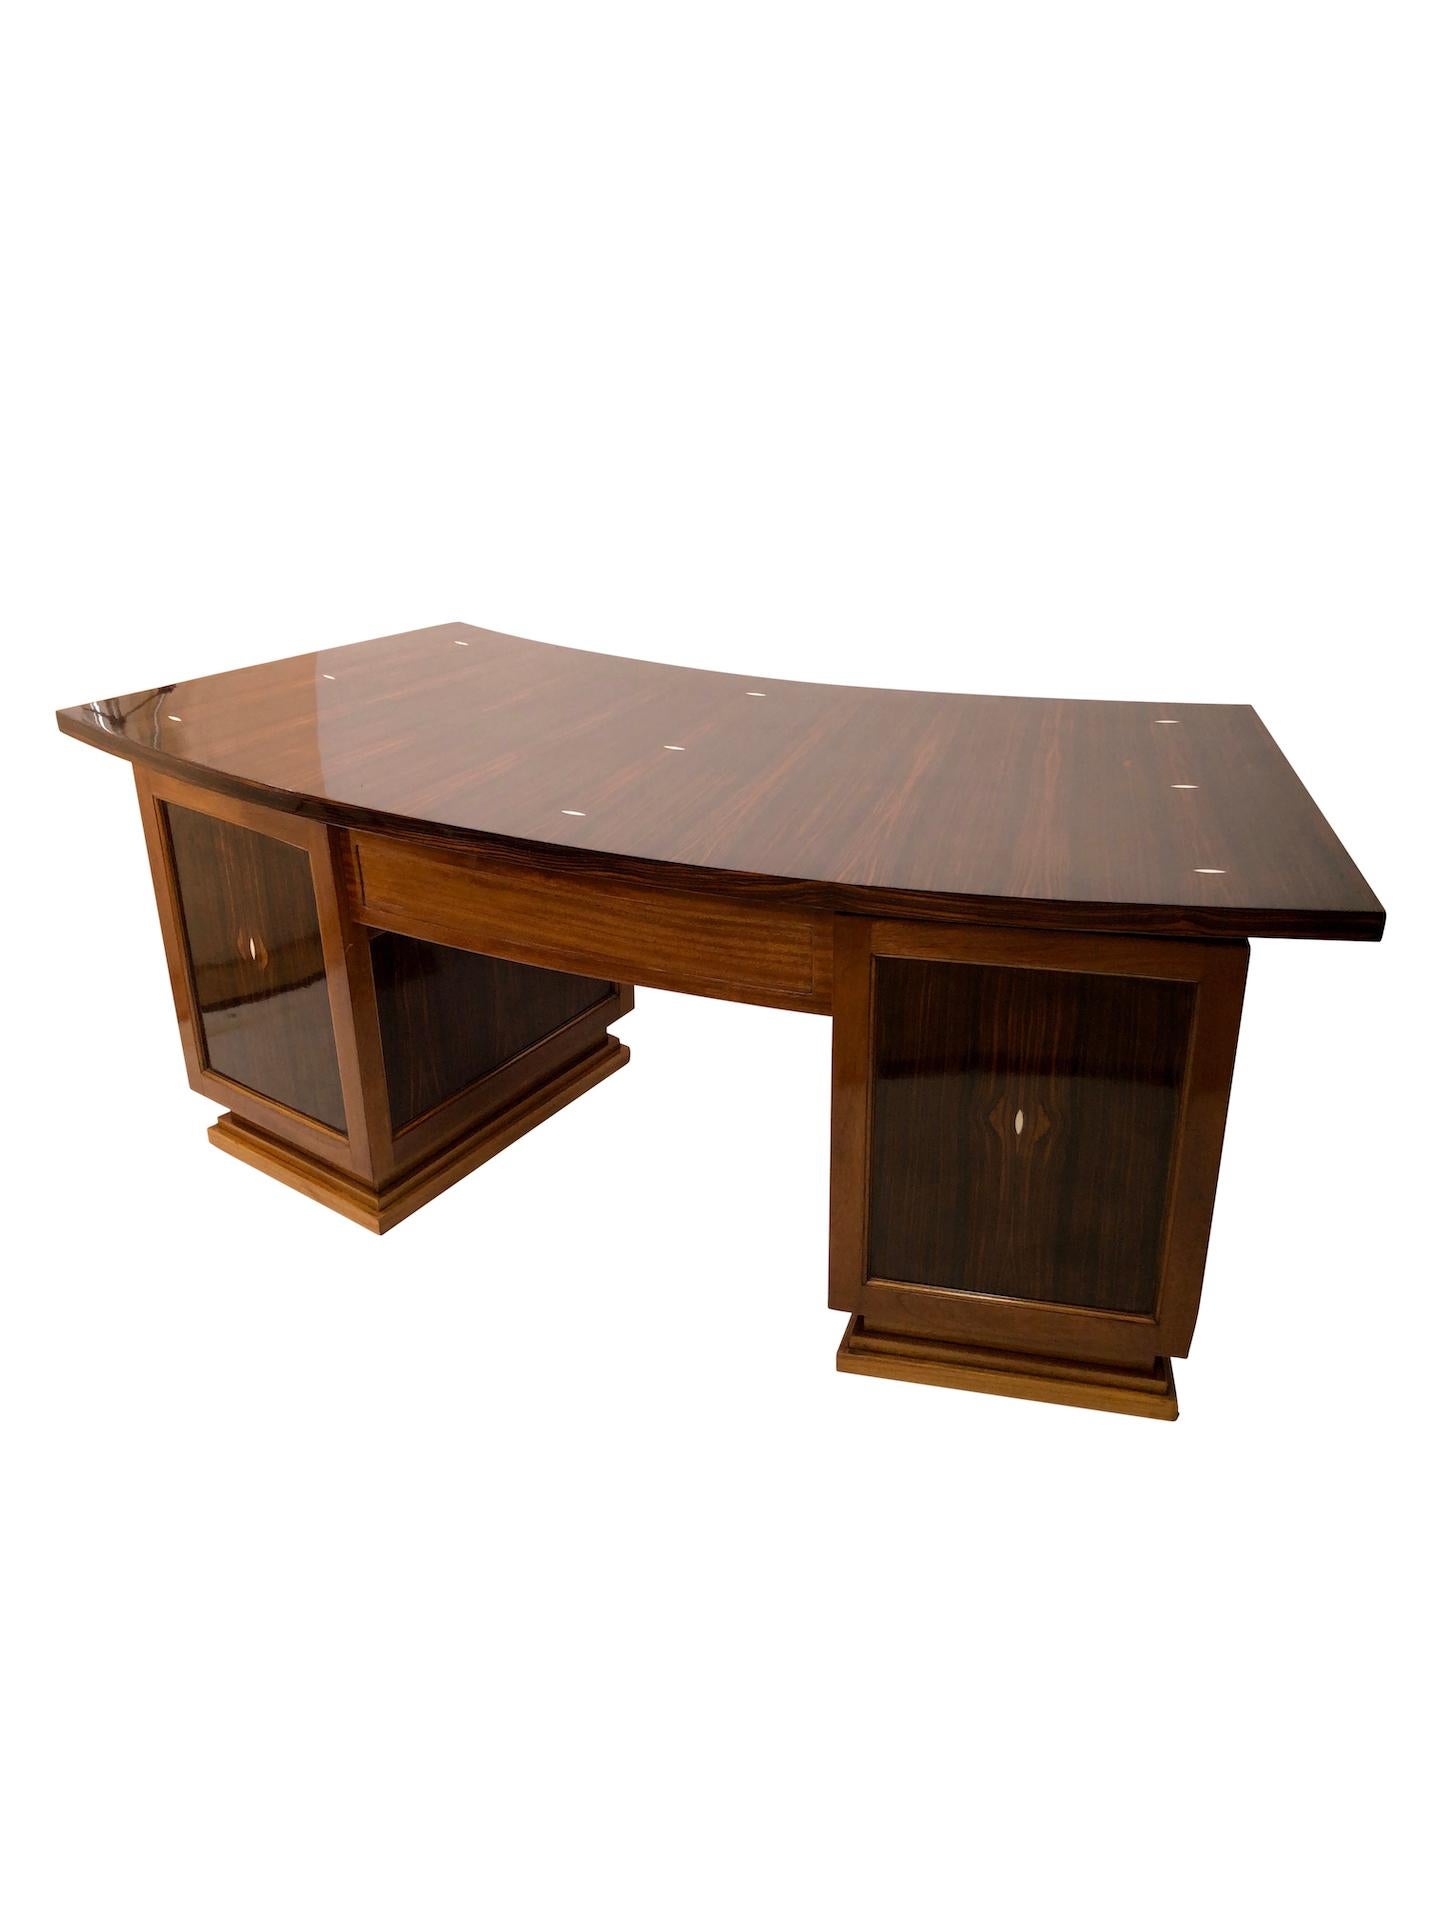 Curved Art Deco Desk in in Real Wood Veneer with Inlays For Sale 7